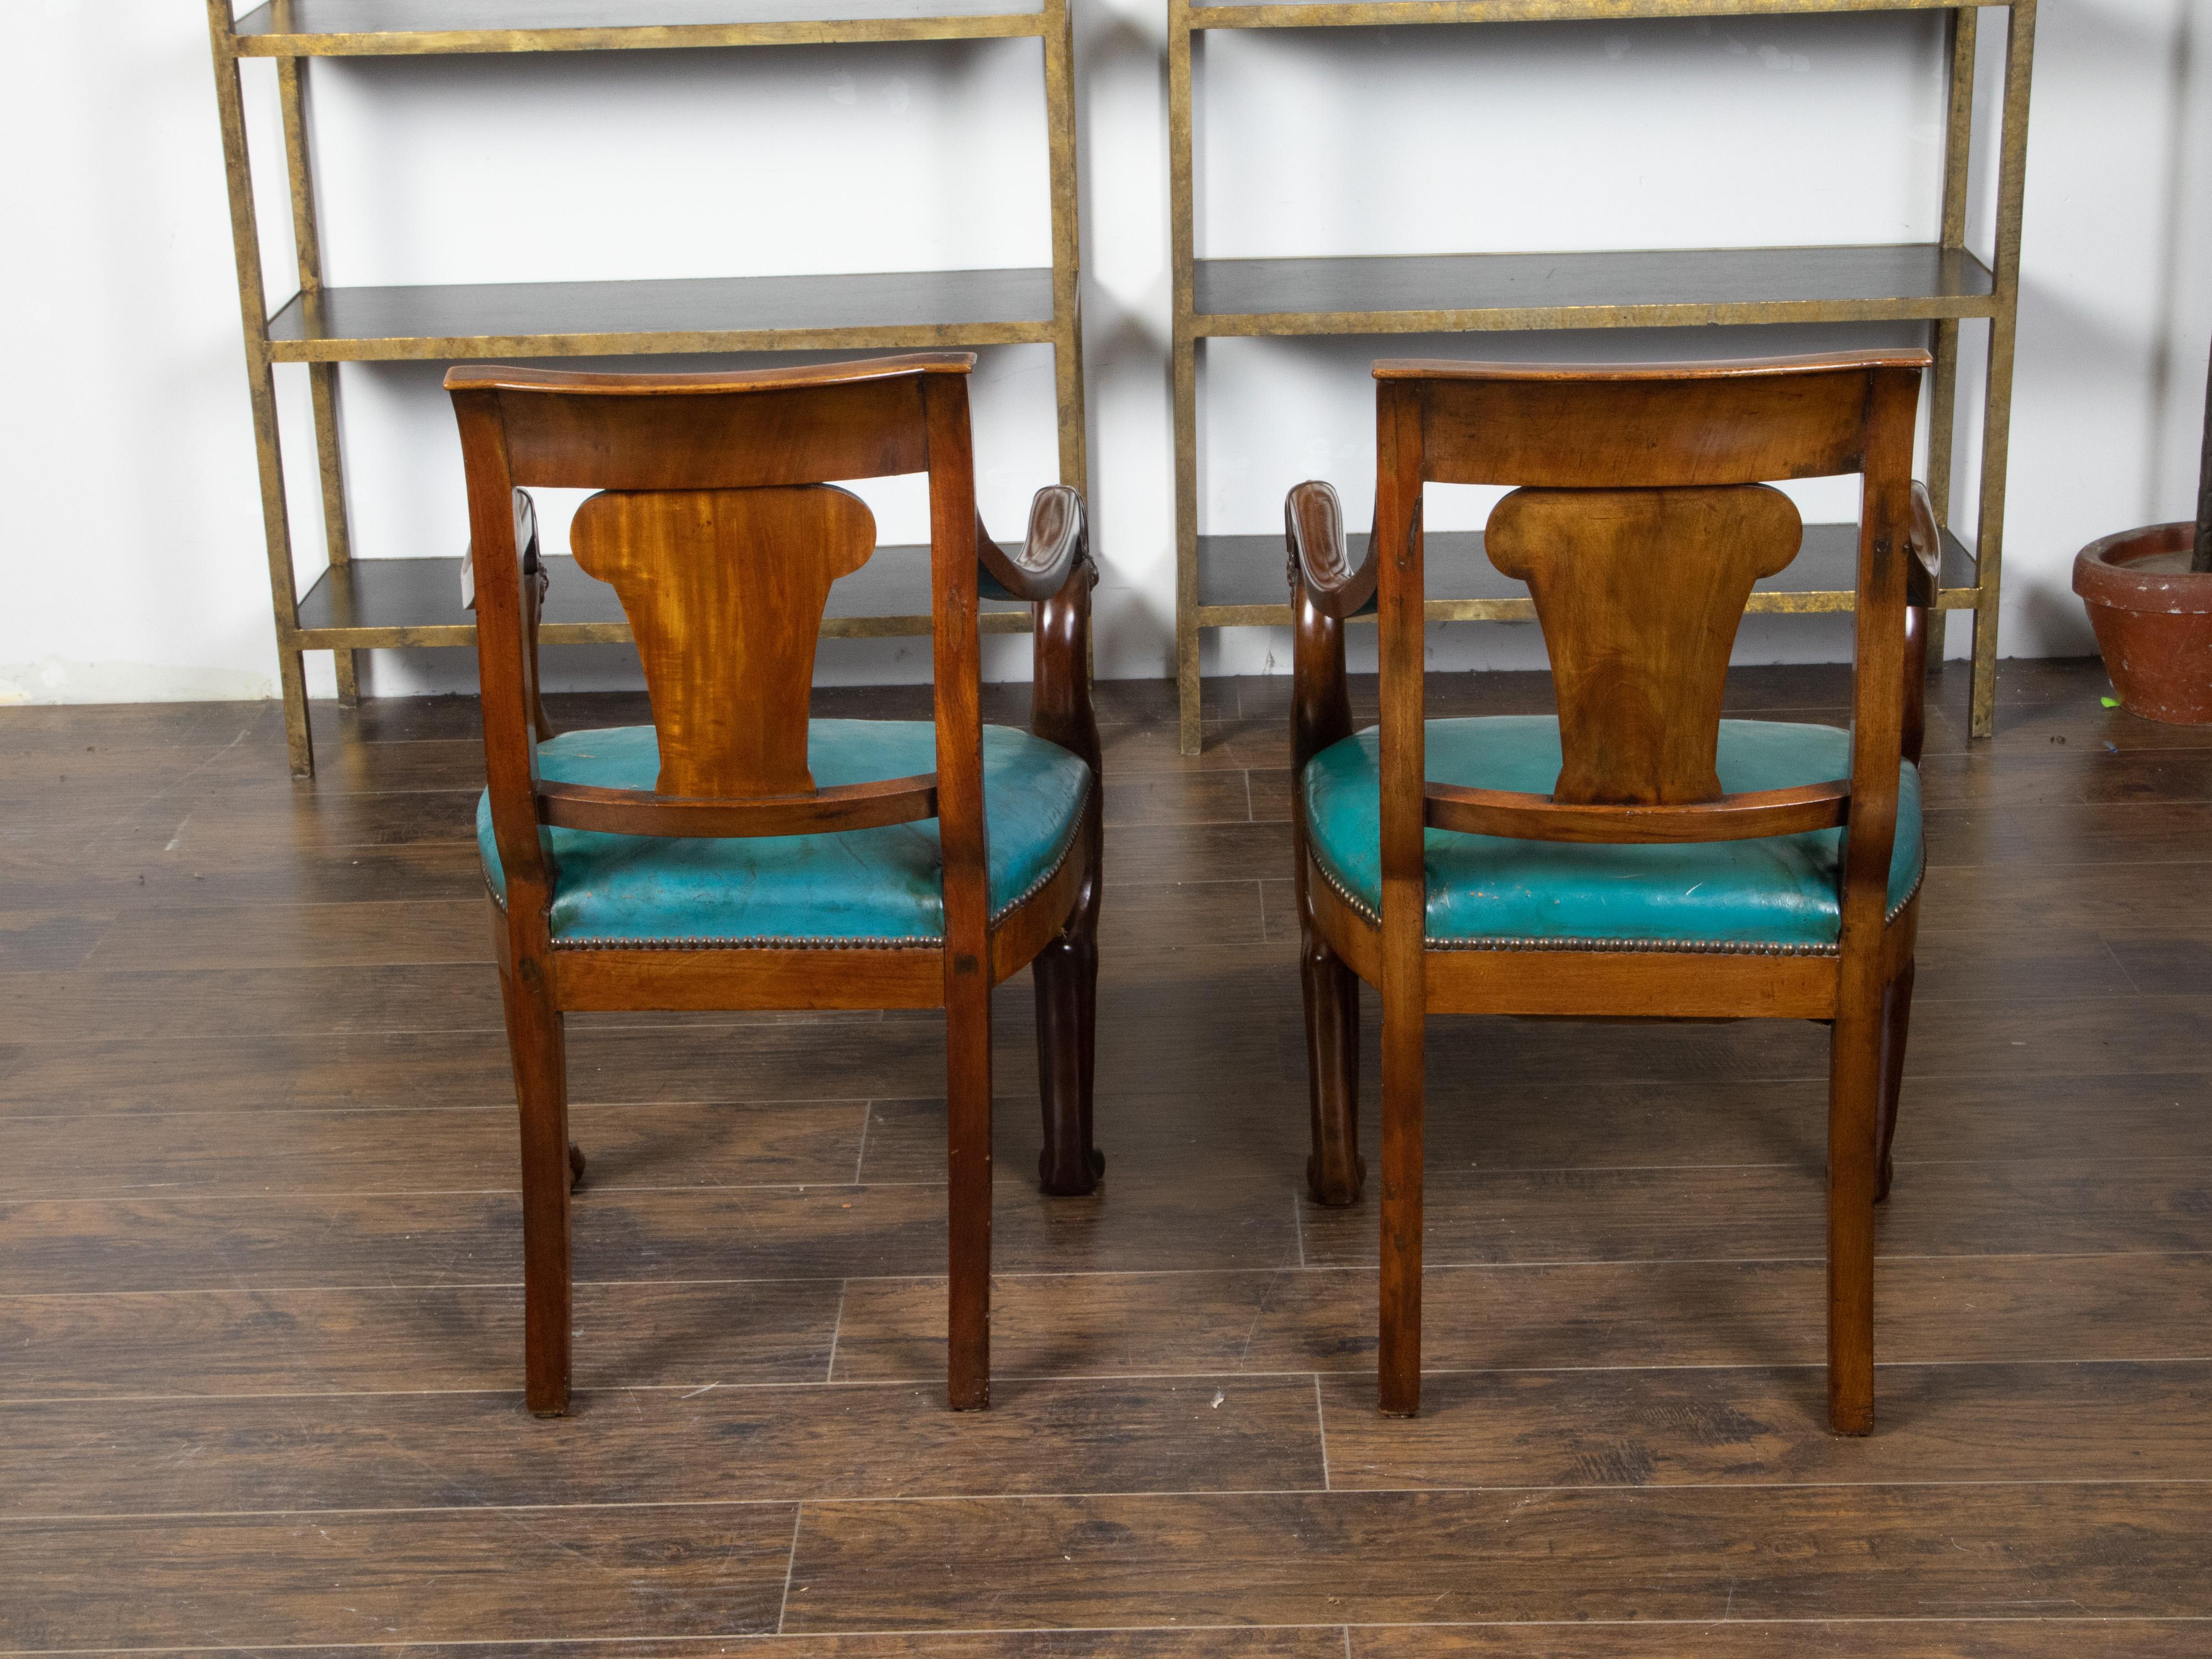 Pair of English Regency 1840s Mahogany Chairs with Ionic Capitals and Griffons For Sale 6